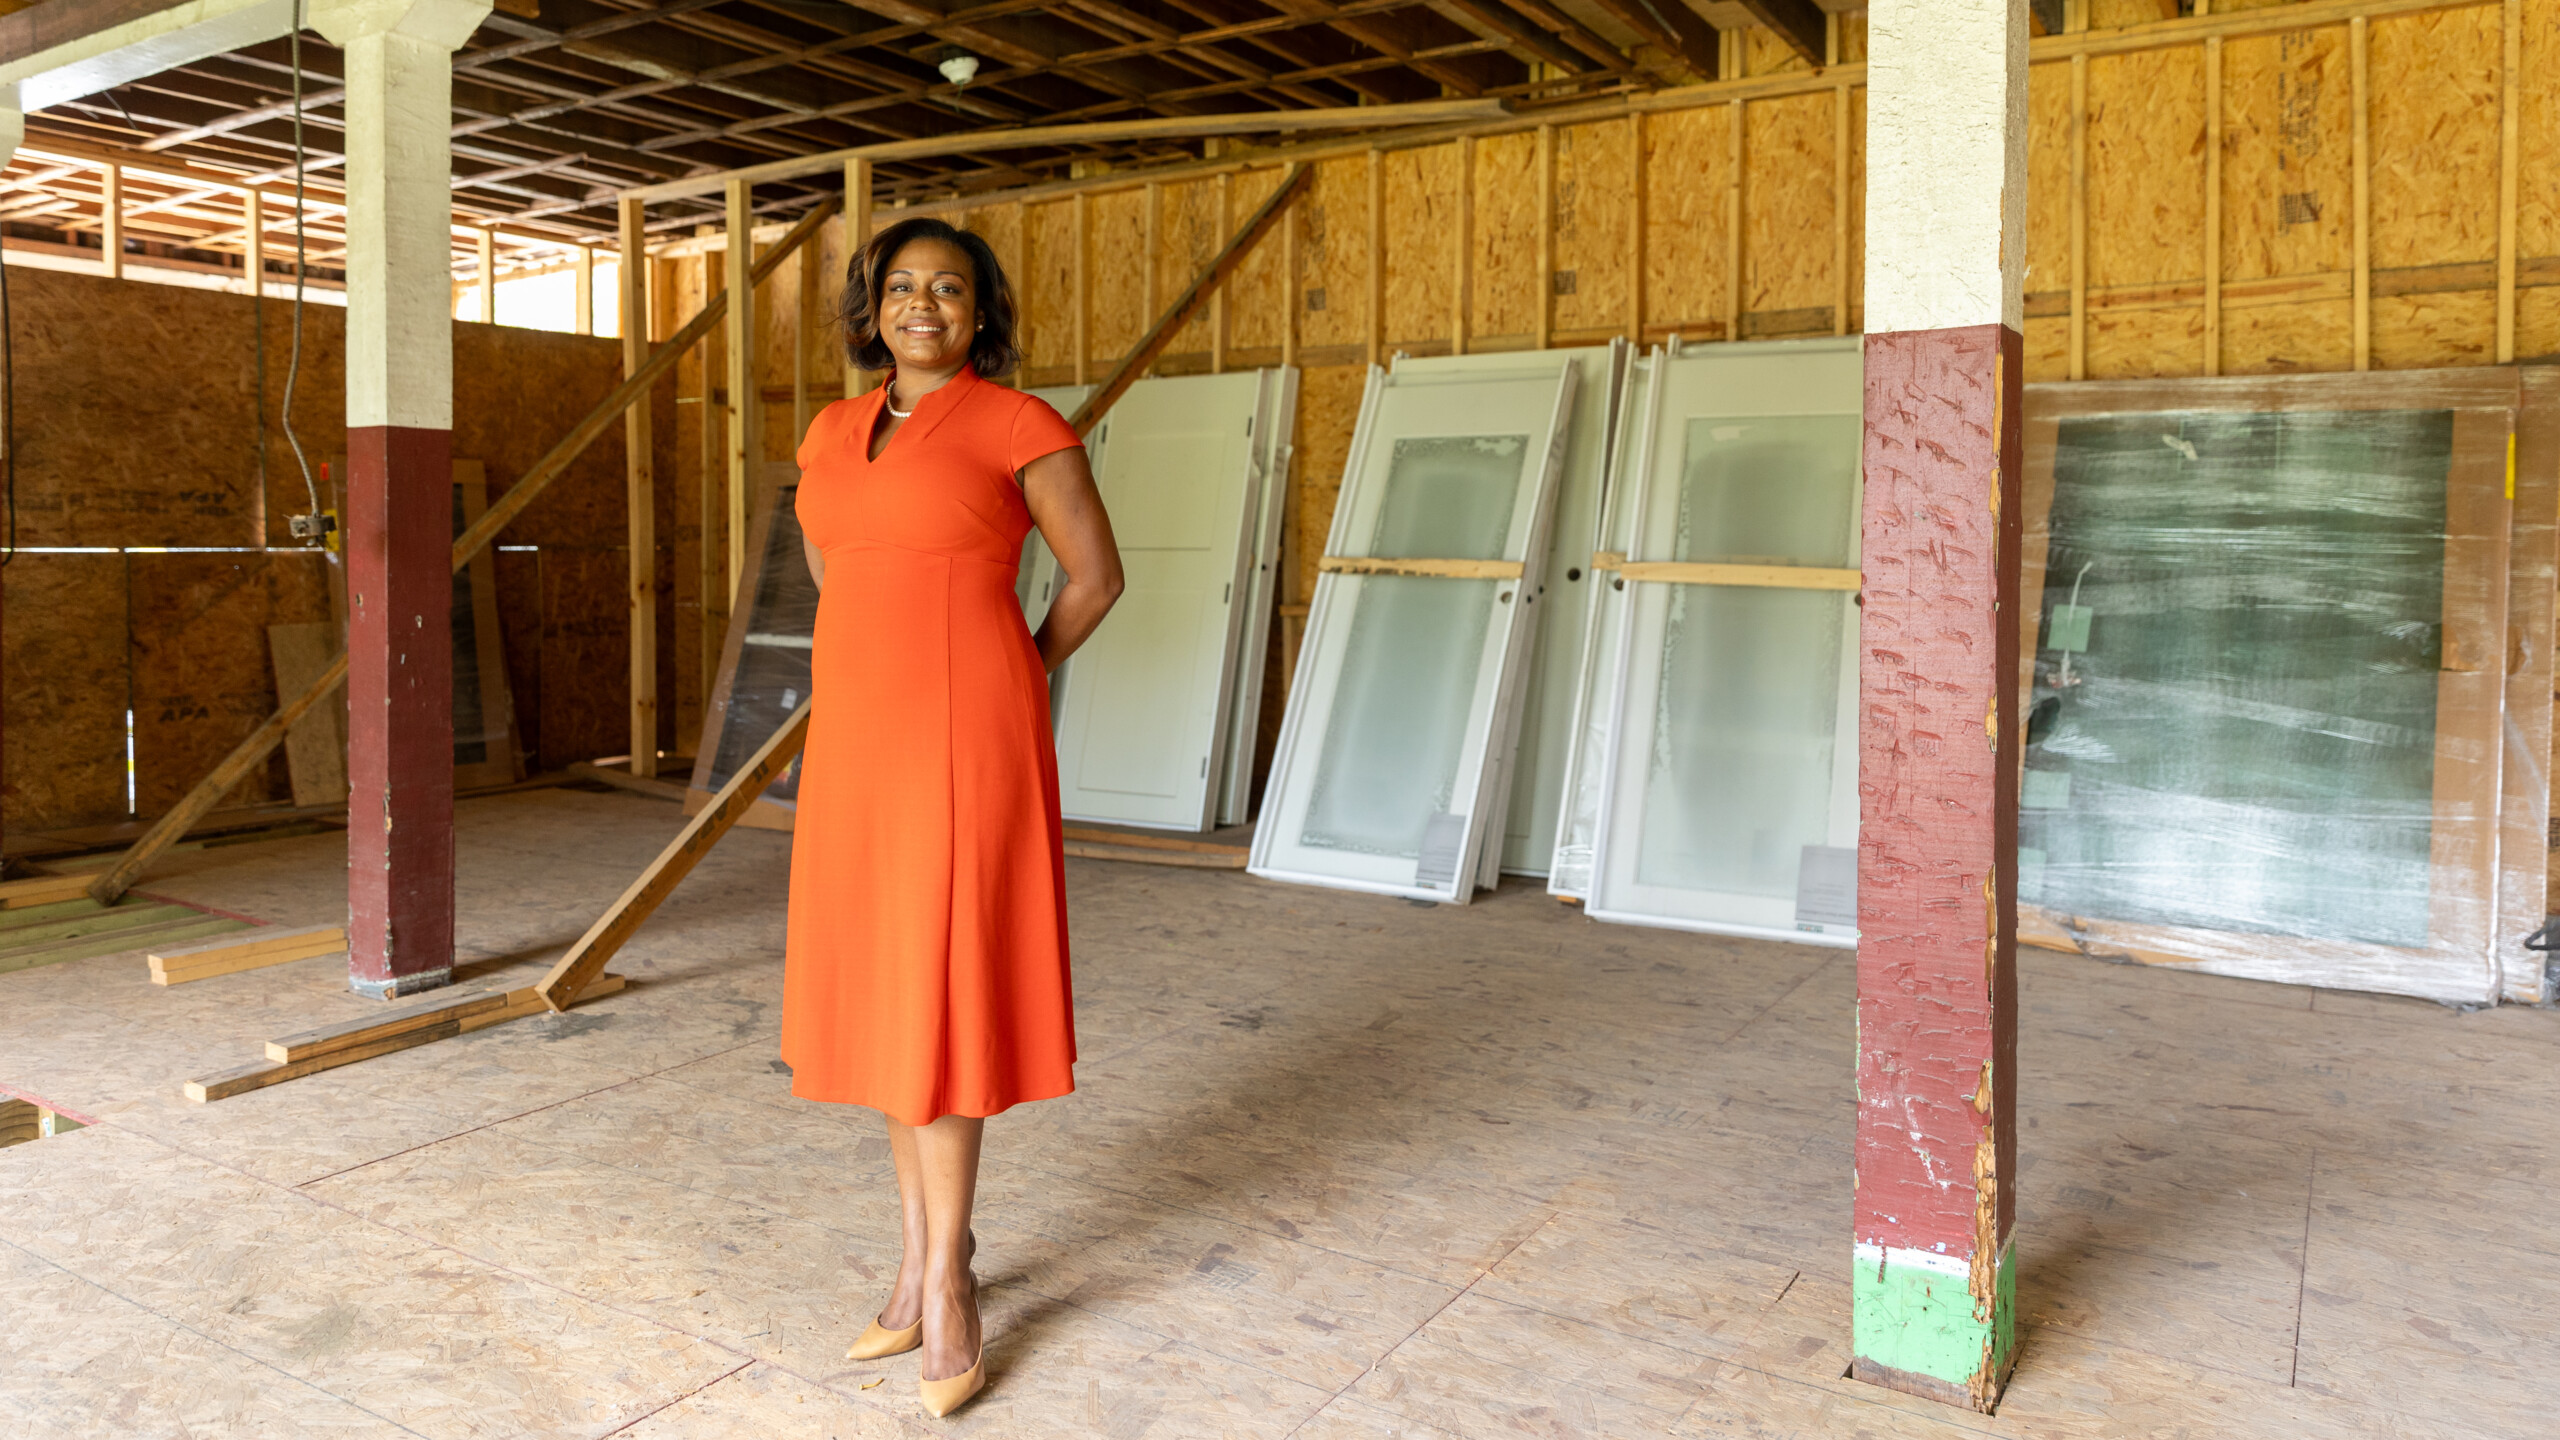 Rebecca Williams is the CEO of Fruit of Barren Trees Pipeline Inc. The nonprofit strives to erect affordable housing in the Moncrief Springs community in Northwest Jacksonville. | Will Brown, Jacksonville Today